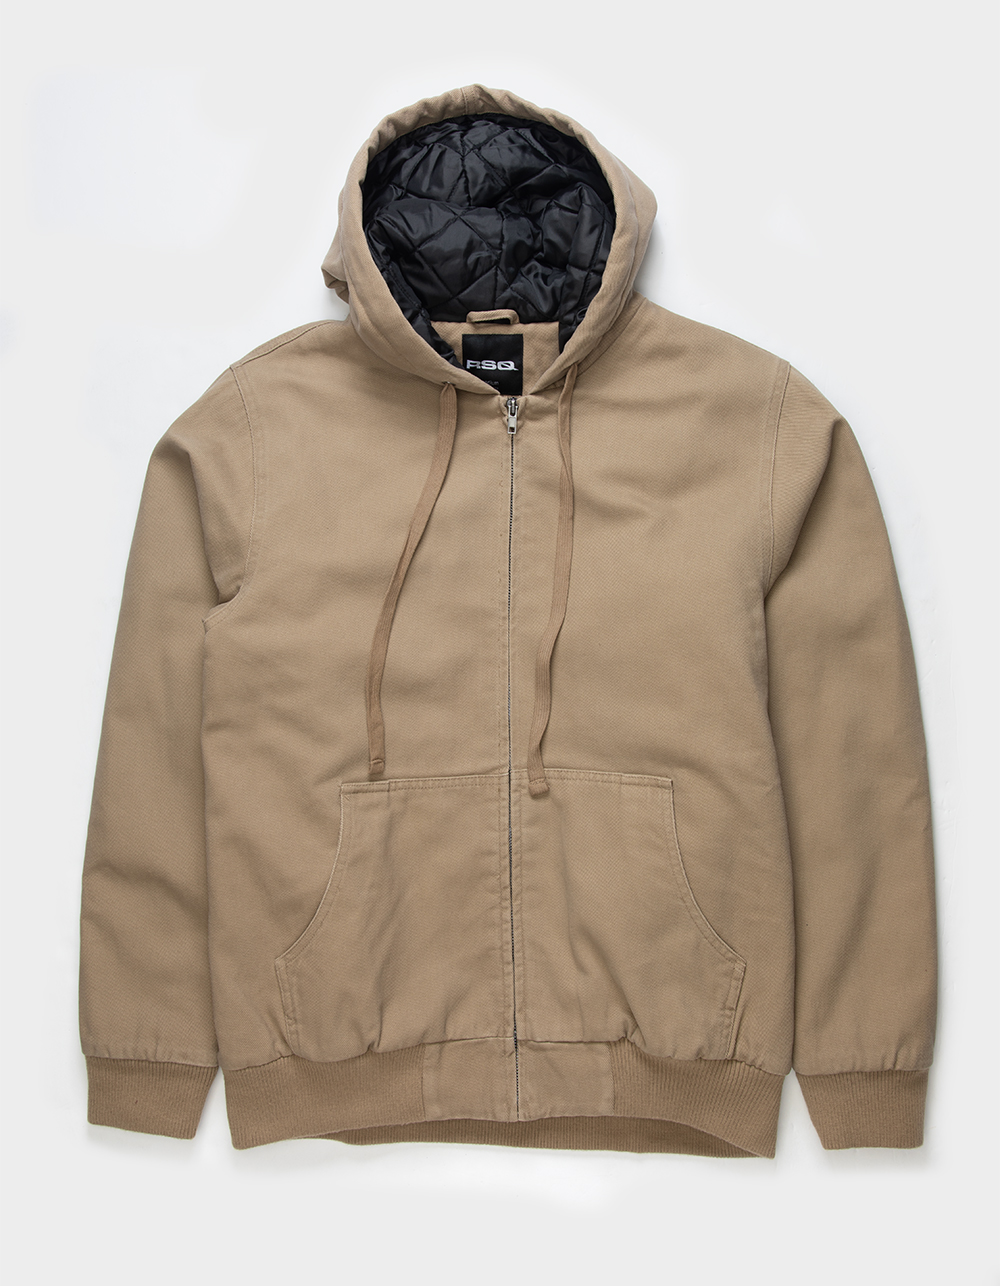 RSQ Mens Hooded Twill Jacket